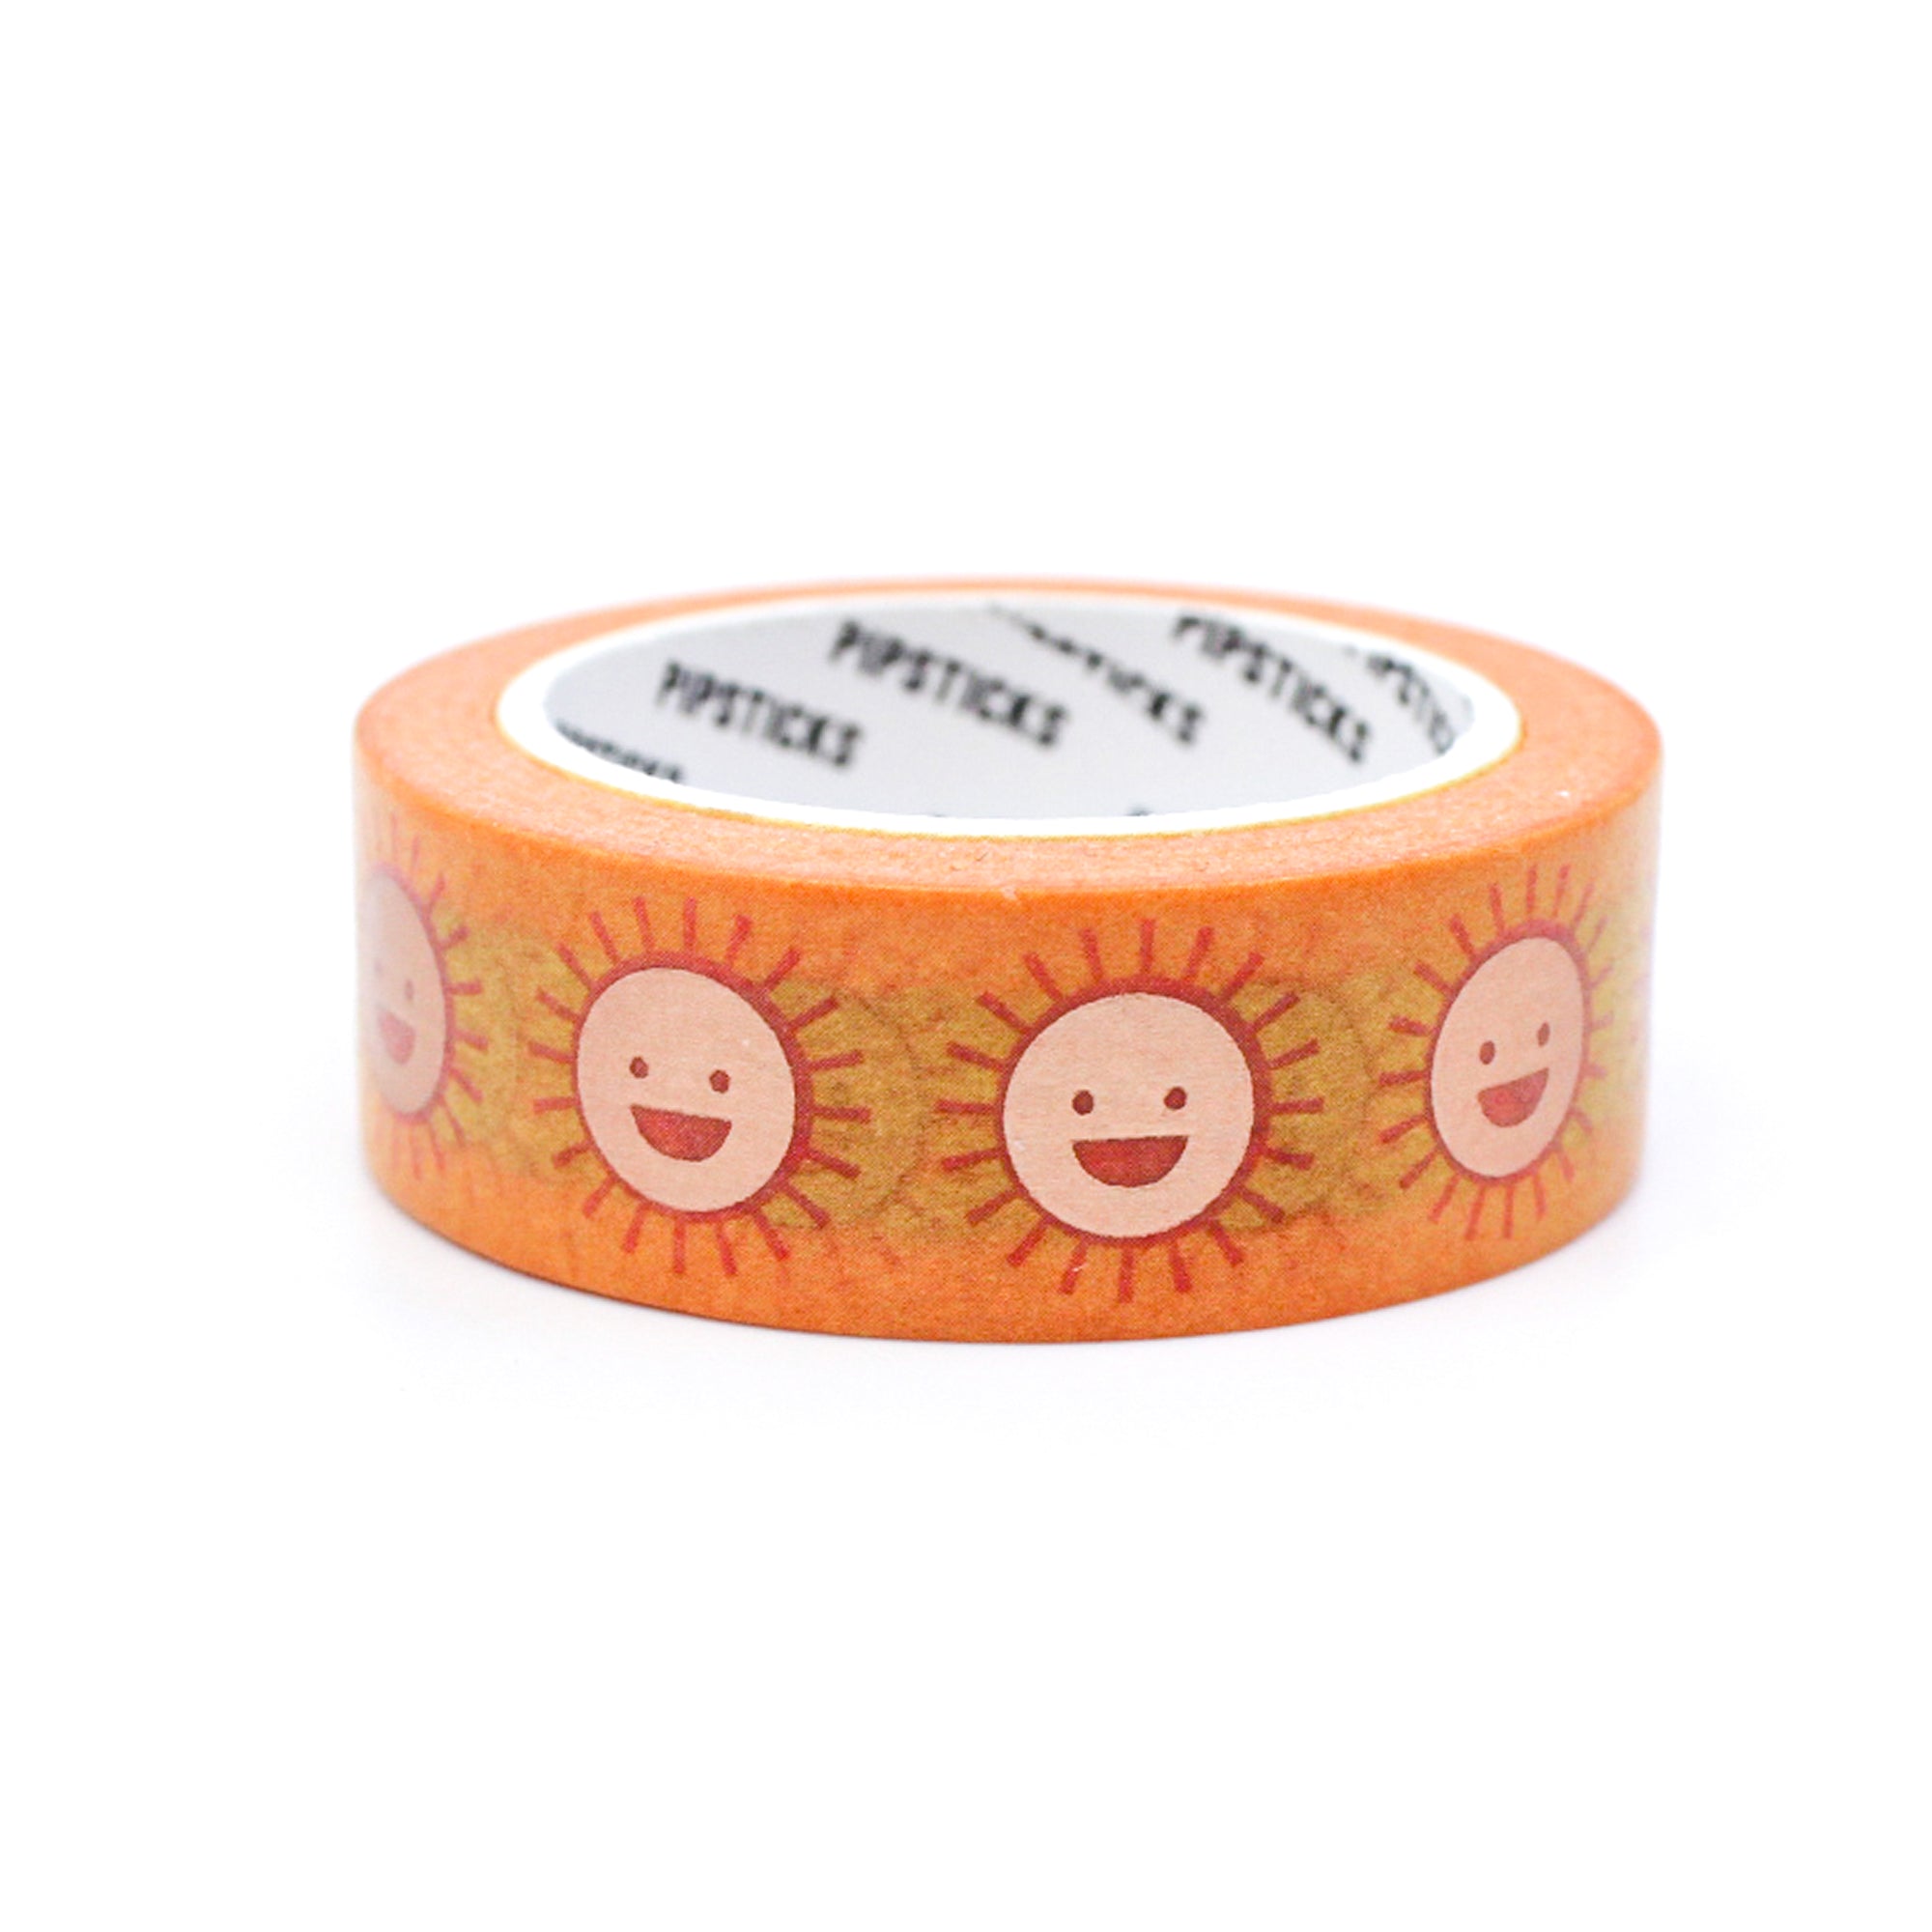 Add a radiant touch to your crafts with our smiling sun foil washi tape, featuring a delightful design of a beaming sun in shining foil, bringing warmth and happiness to your projects. This tape is designed by pipsticks and sold at BBB Supplies Craft Shop.